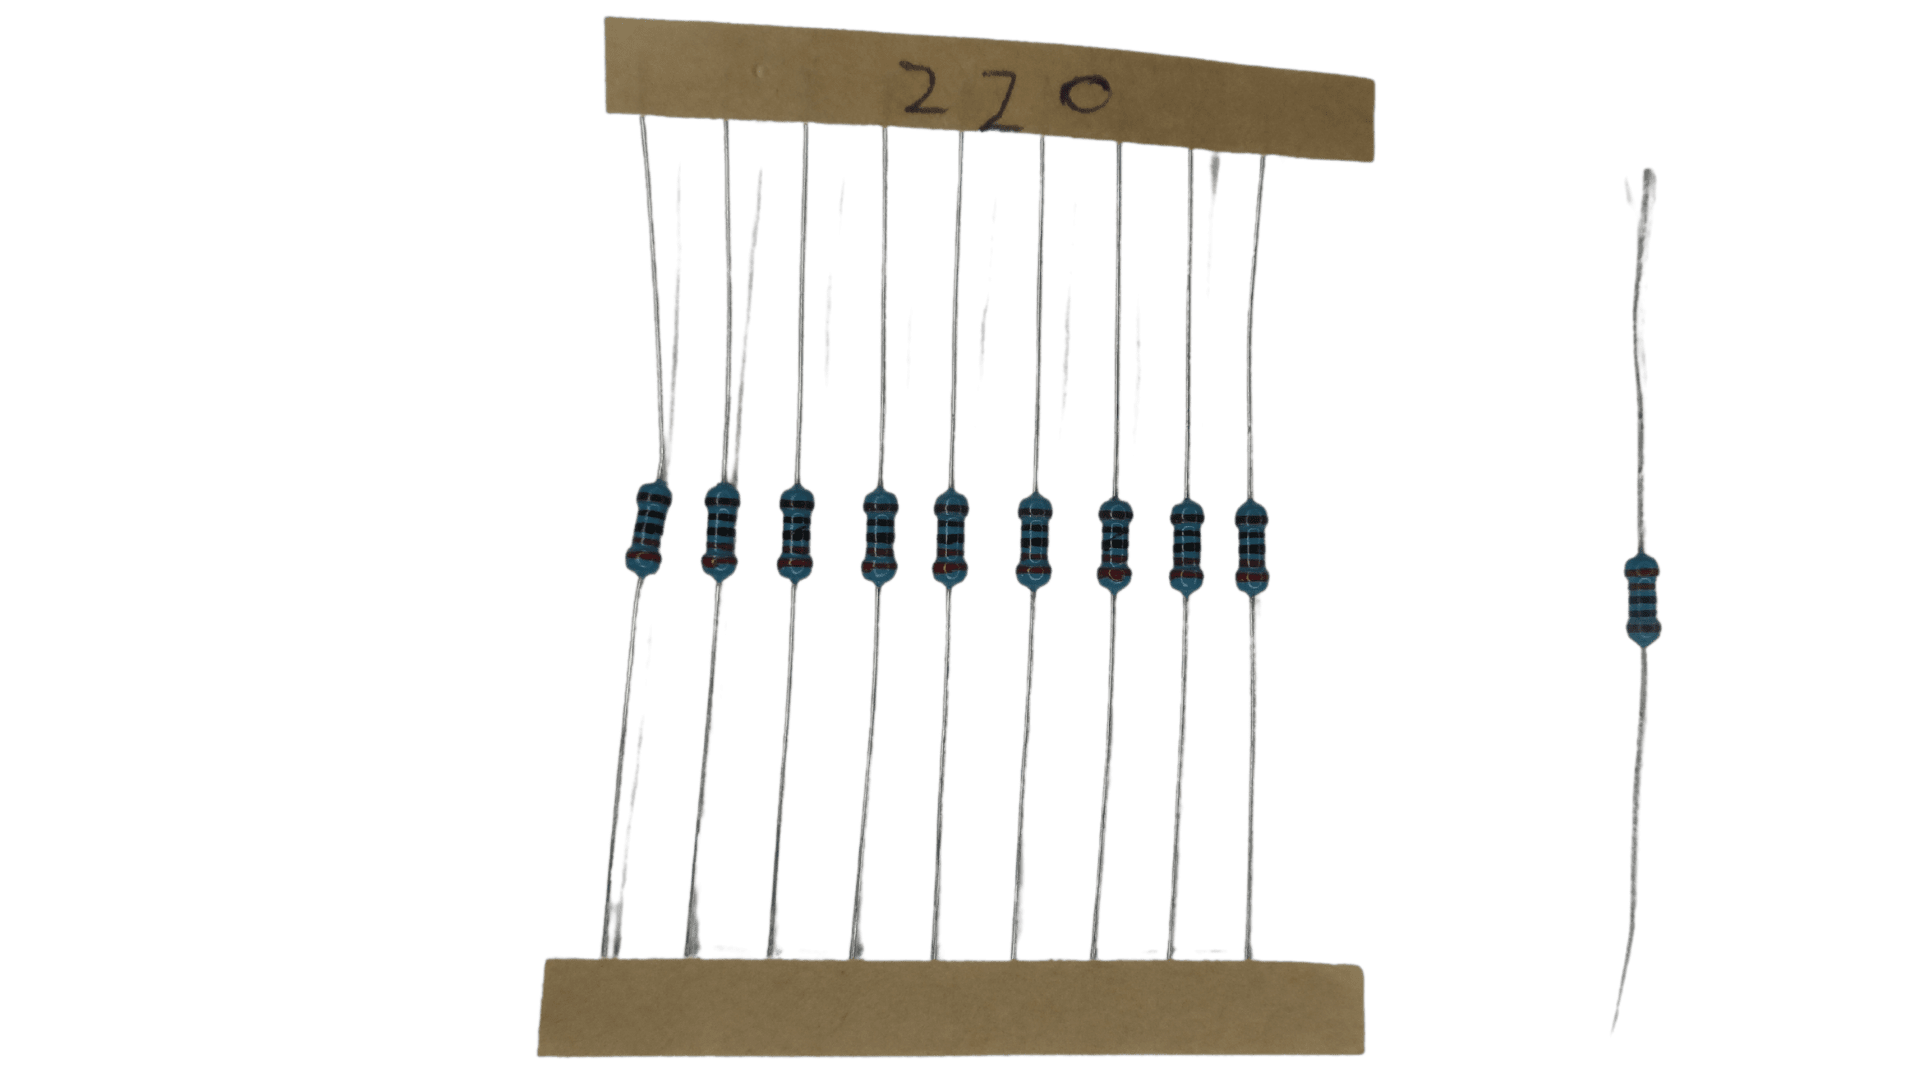 the resistor limit voltage by providing opposition to electric current